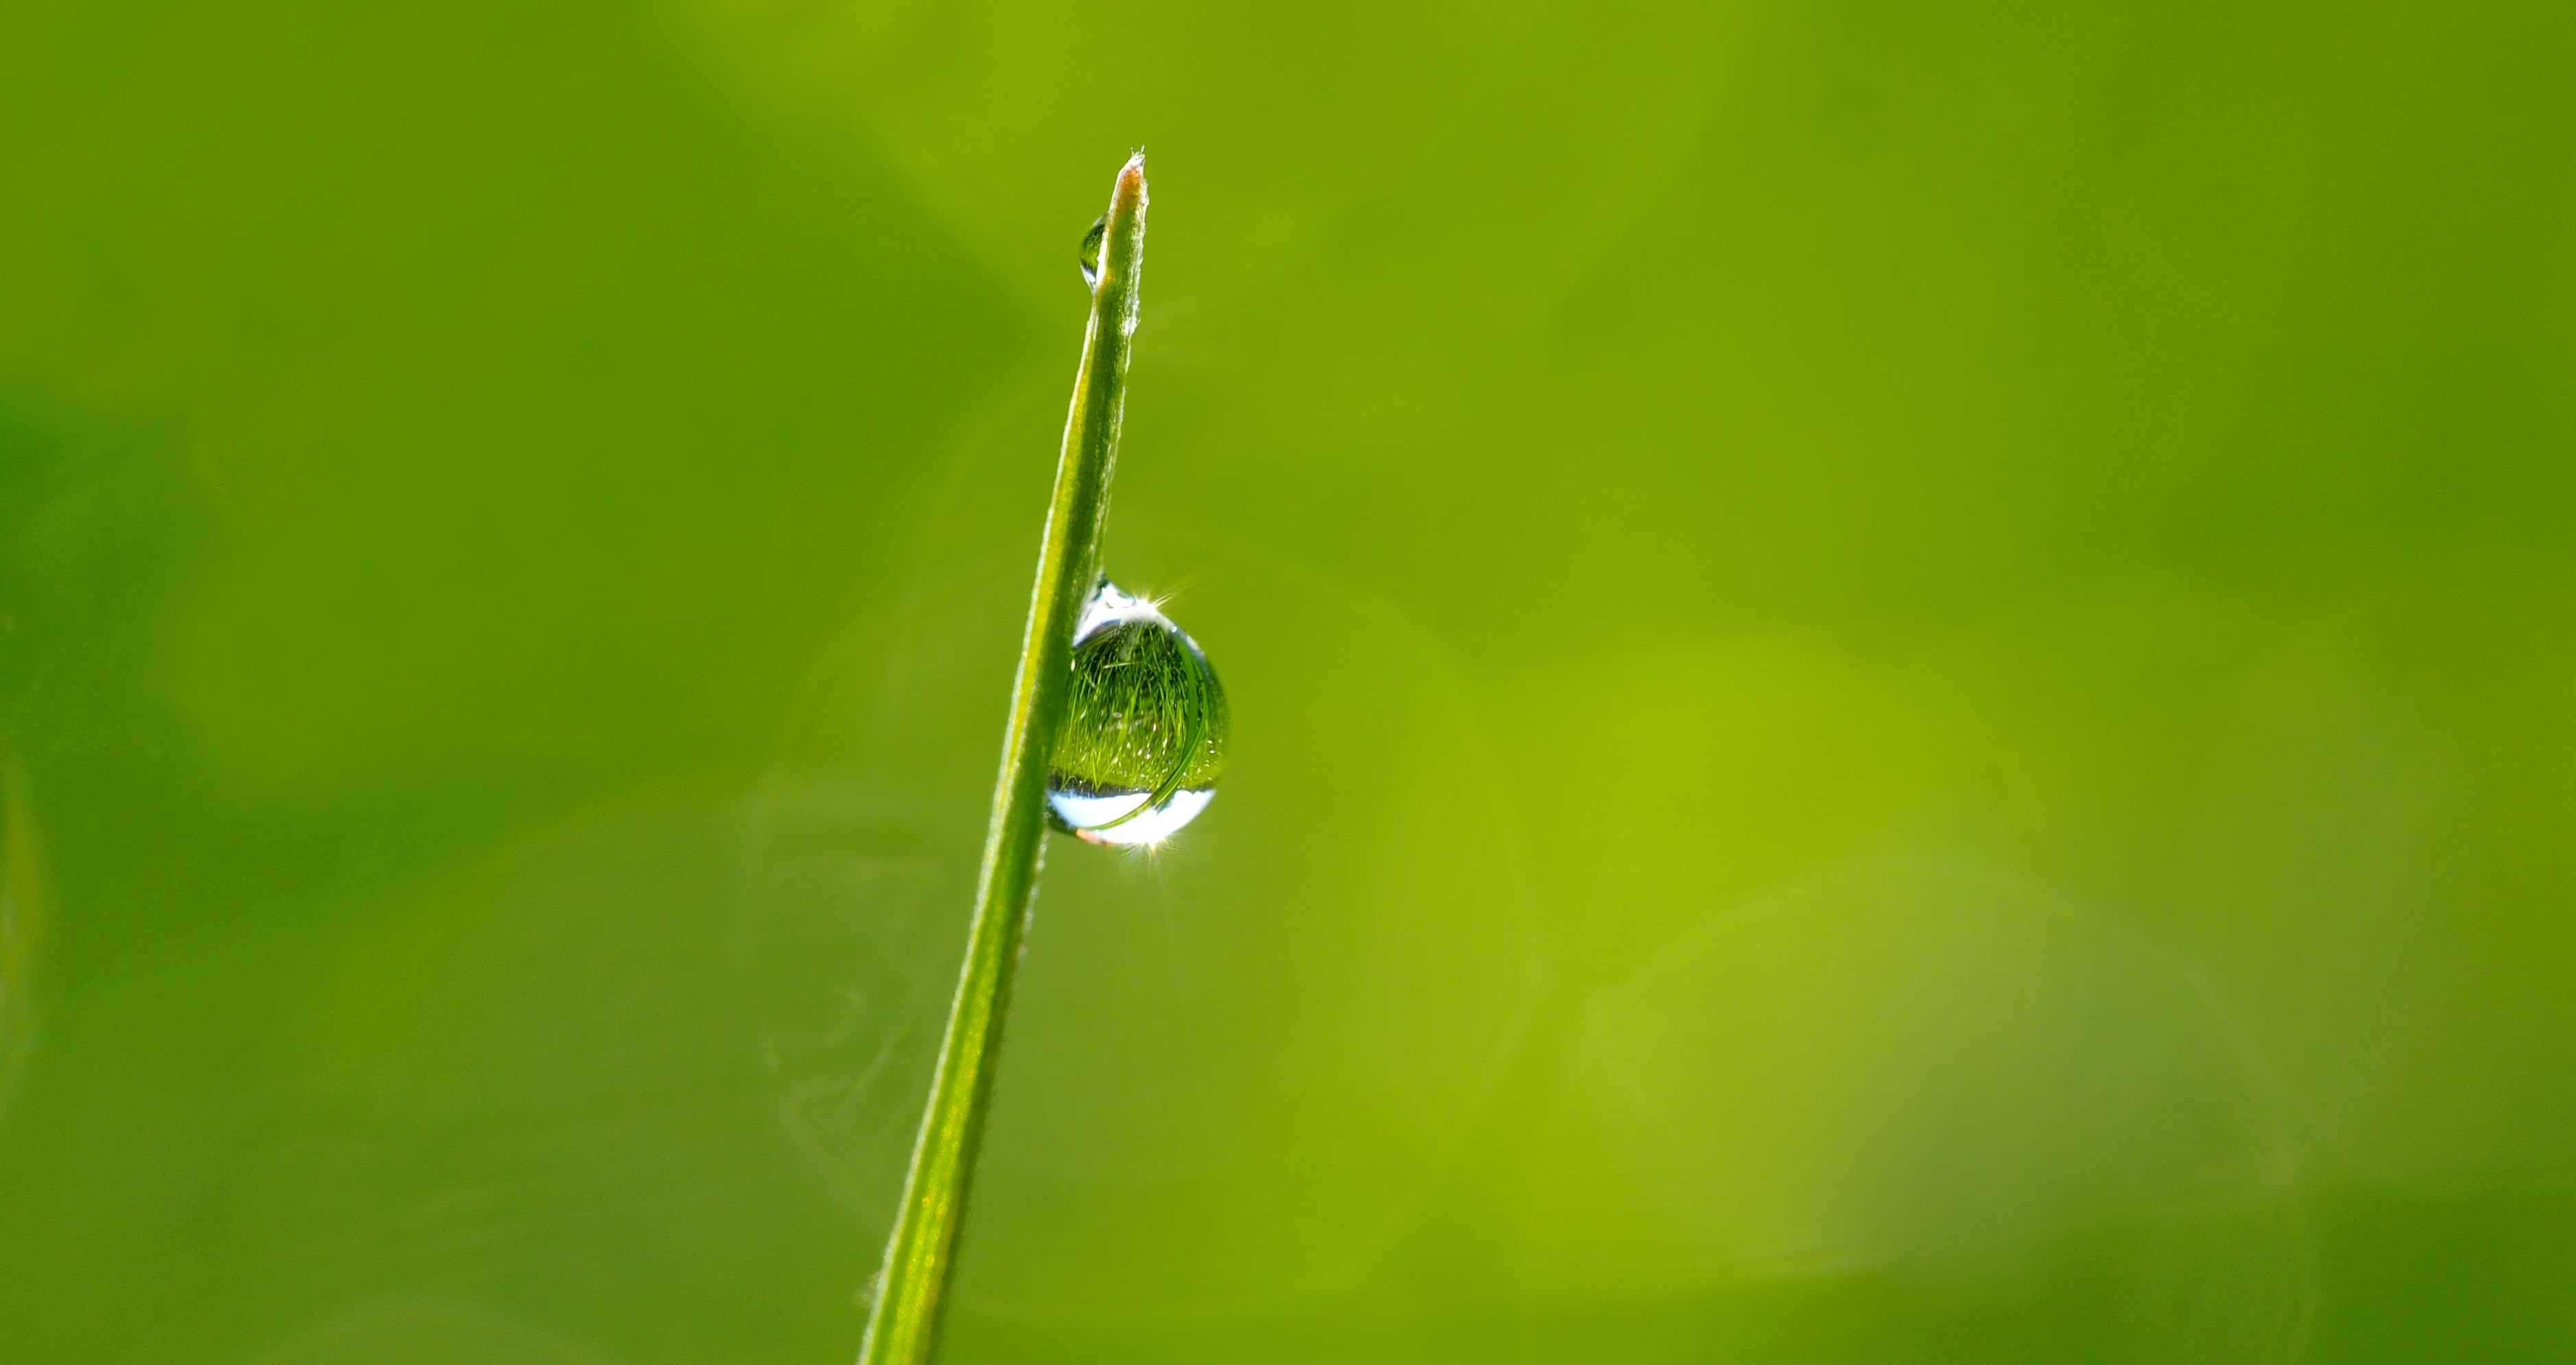 Free photo: Macro Photography of Droplet on Green Leaf during Daytime -  Blade of grass, Light glare, Water - Free Download - Jooinn